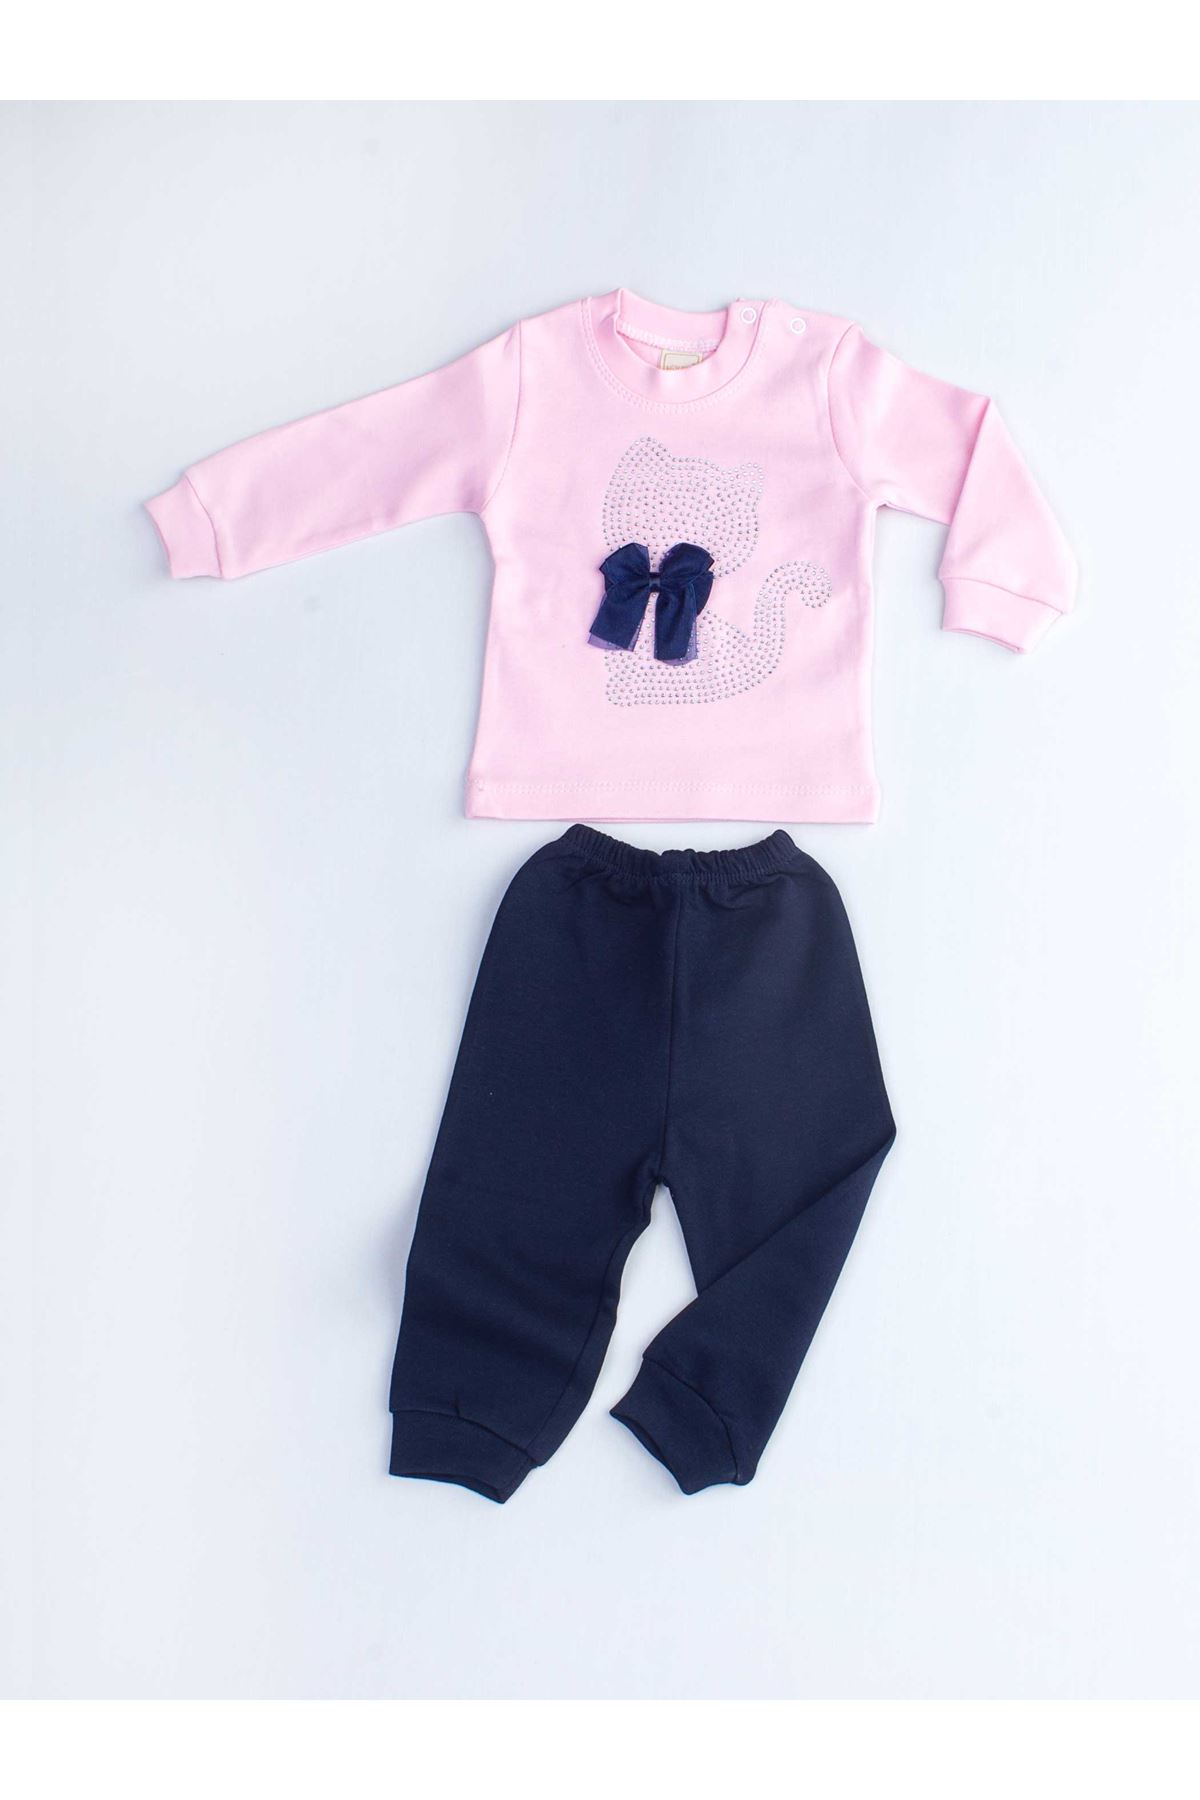 Pink Rabbit Baby Girl 2 Piece Set Tracksuit Bottom Babies Girls Wear Top Outfit Cotton Casual Casual Outfit Models